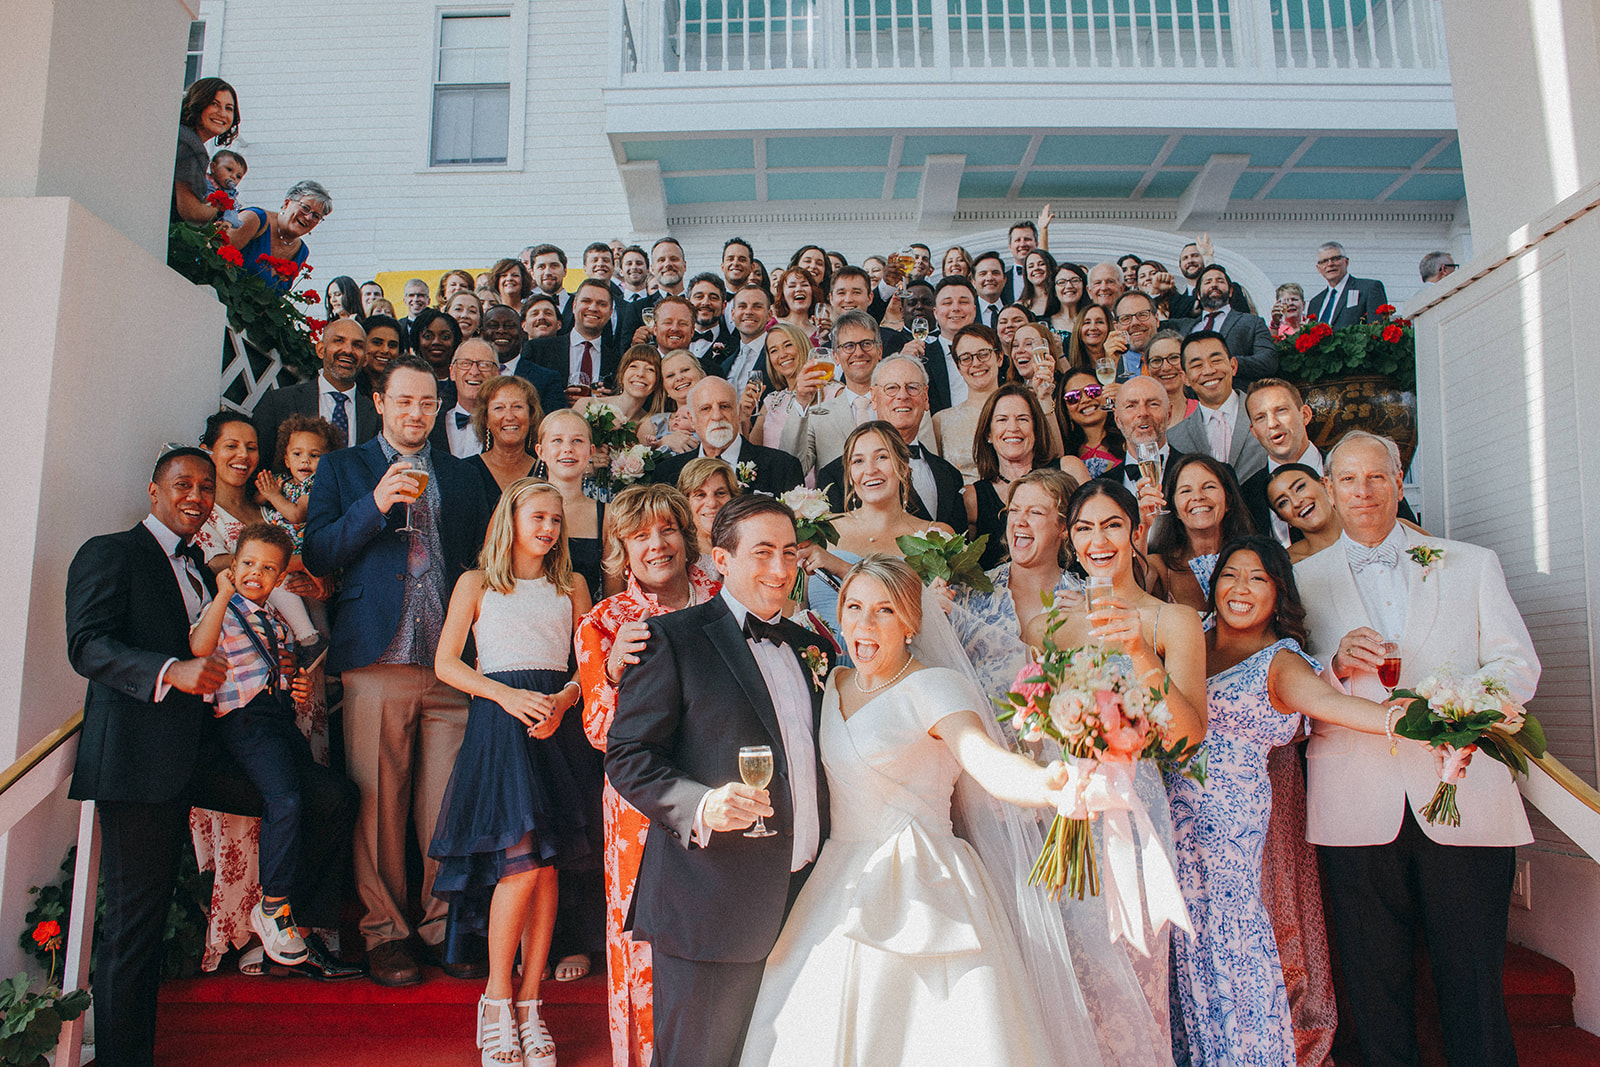 A bride and groom get a photo with all their wedding guests on the red carpeted steps at the Grand Hotel